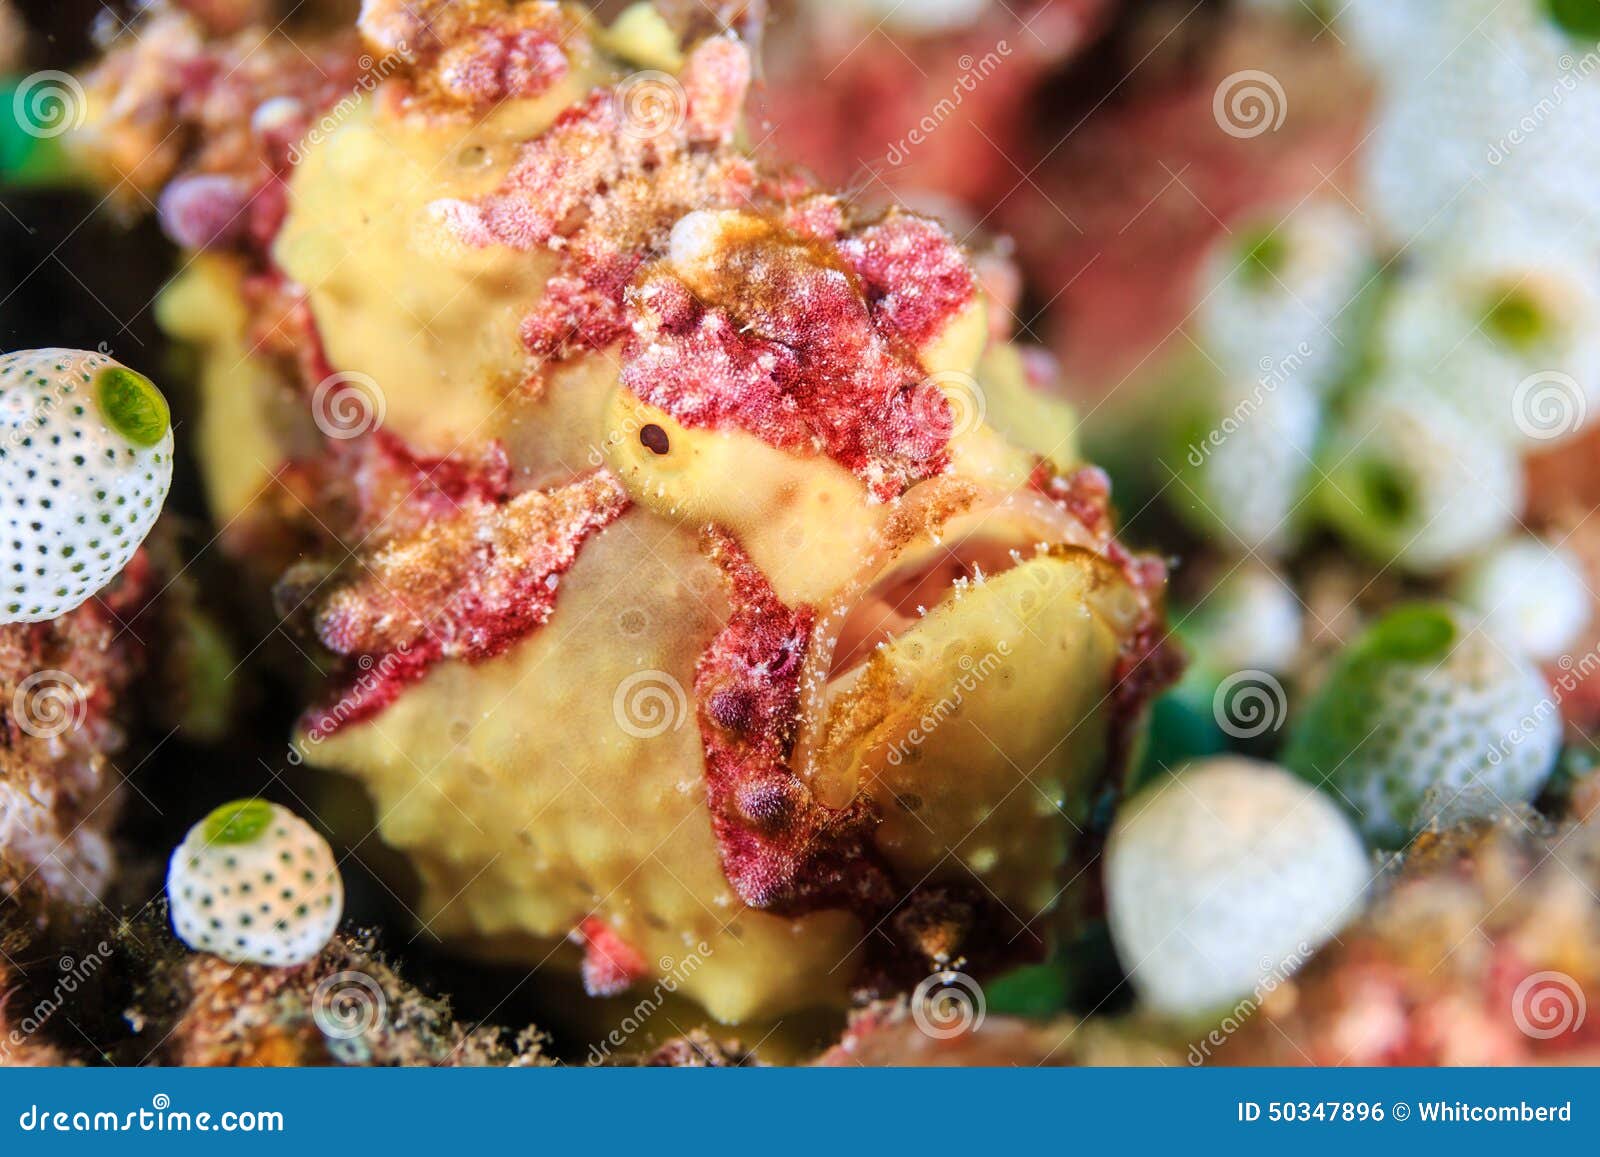 warty frogfish